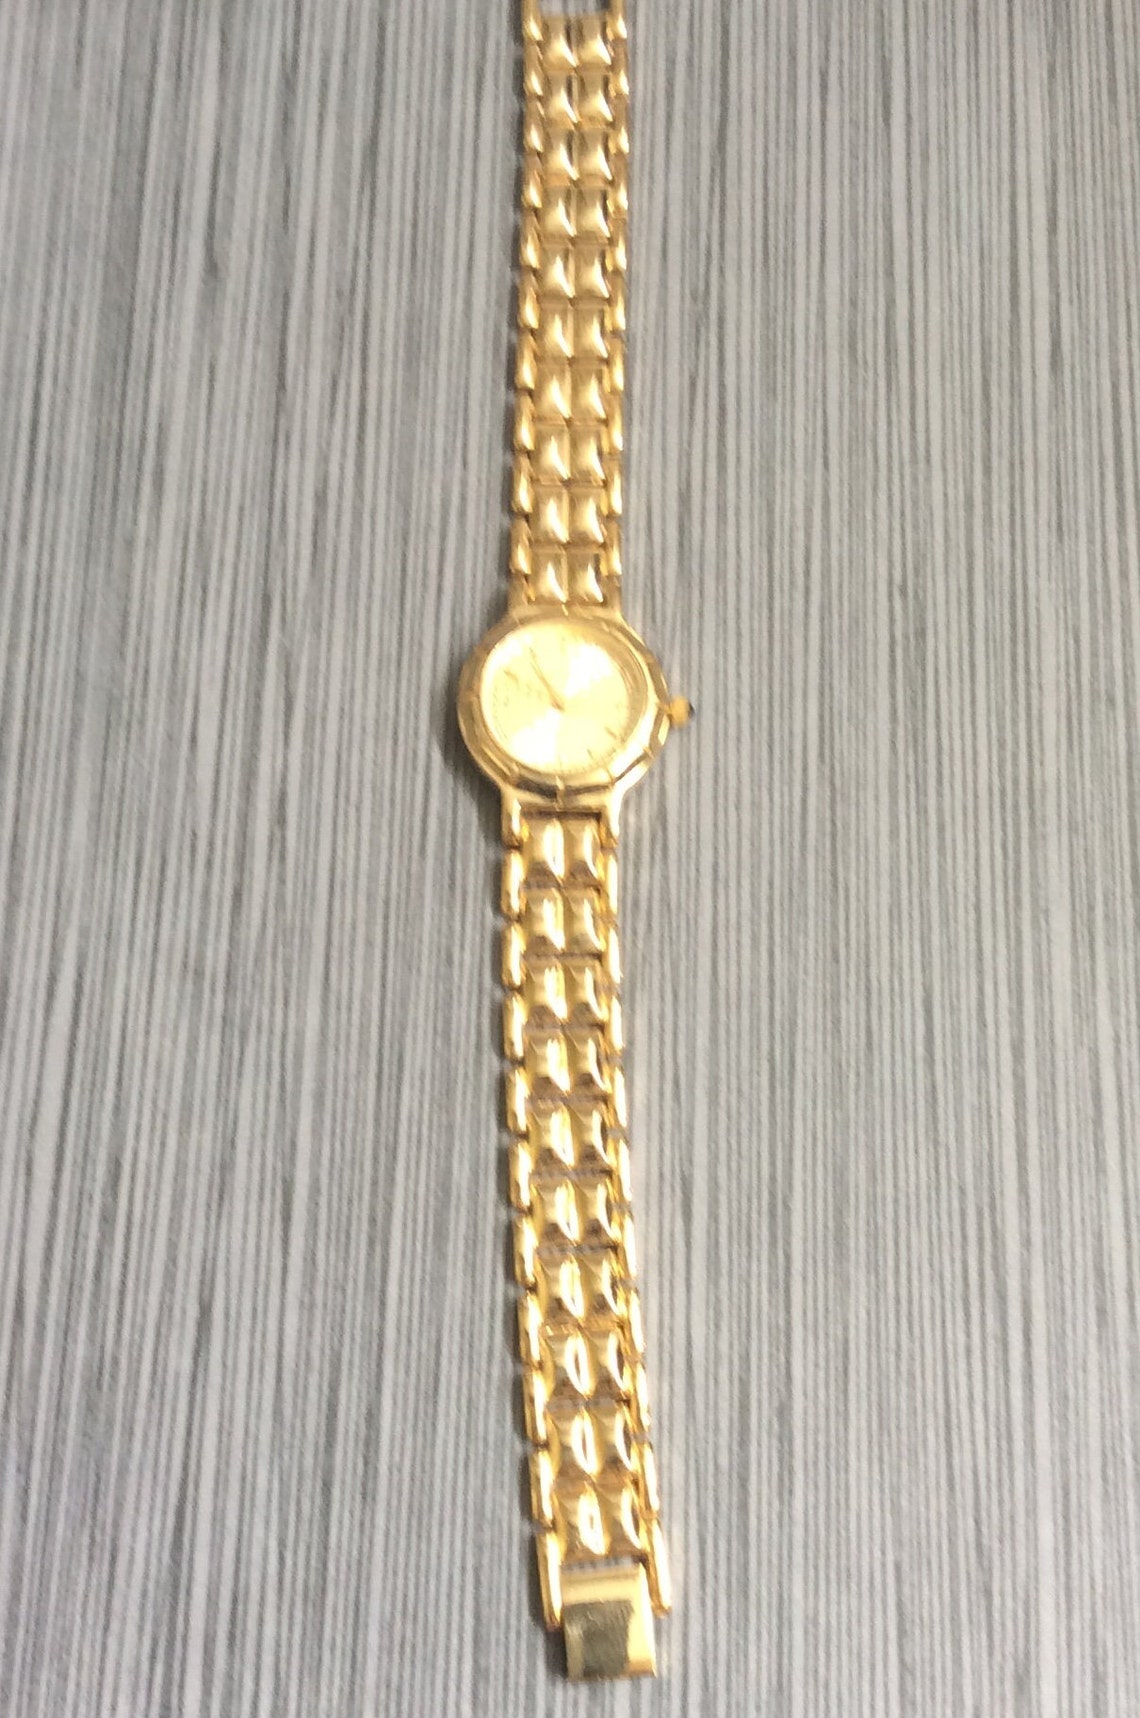 Oleg Cassini Gold Women's Watch Round Gold Dial Gold Index | Etsy